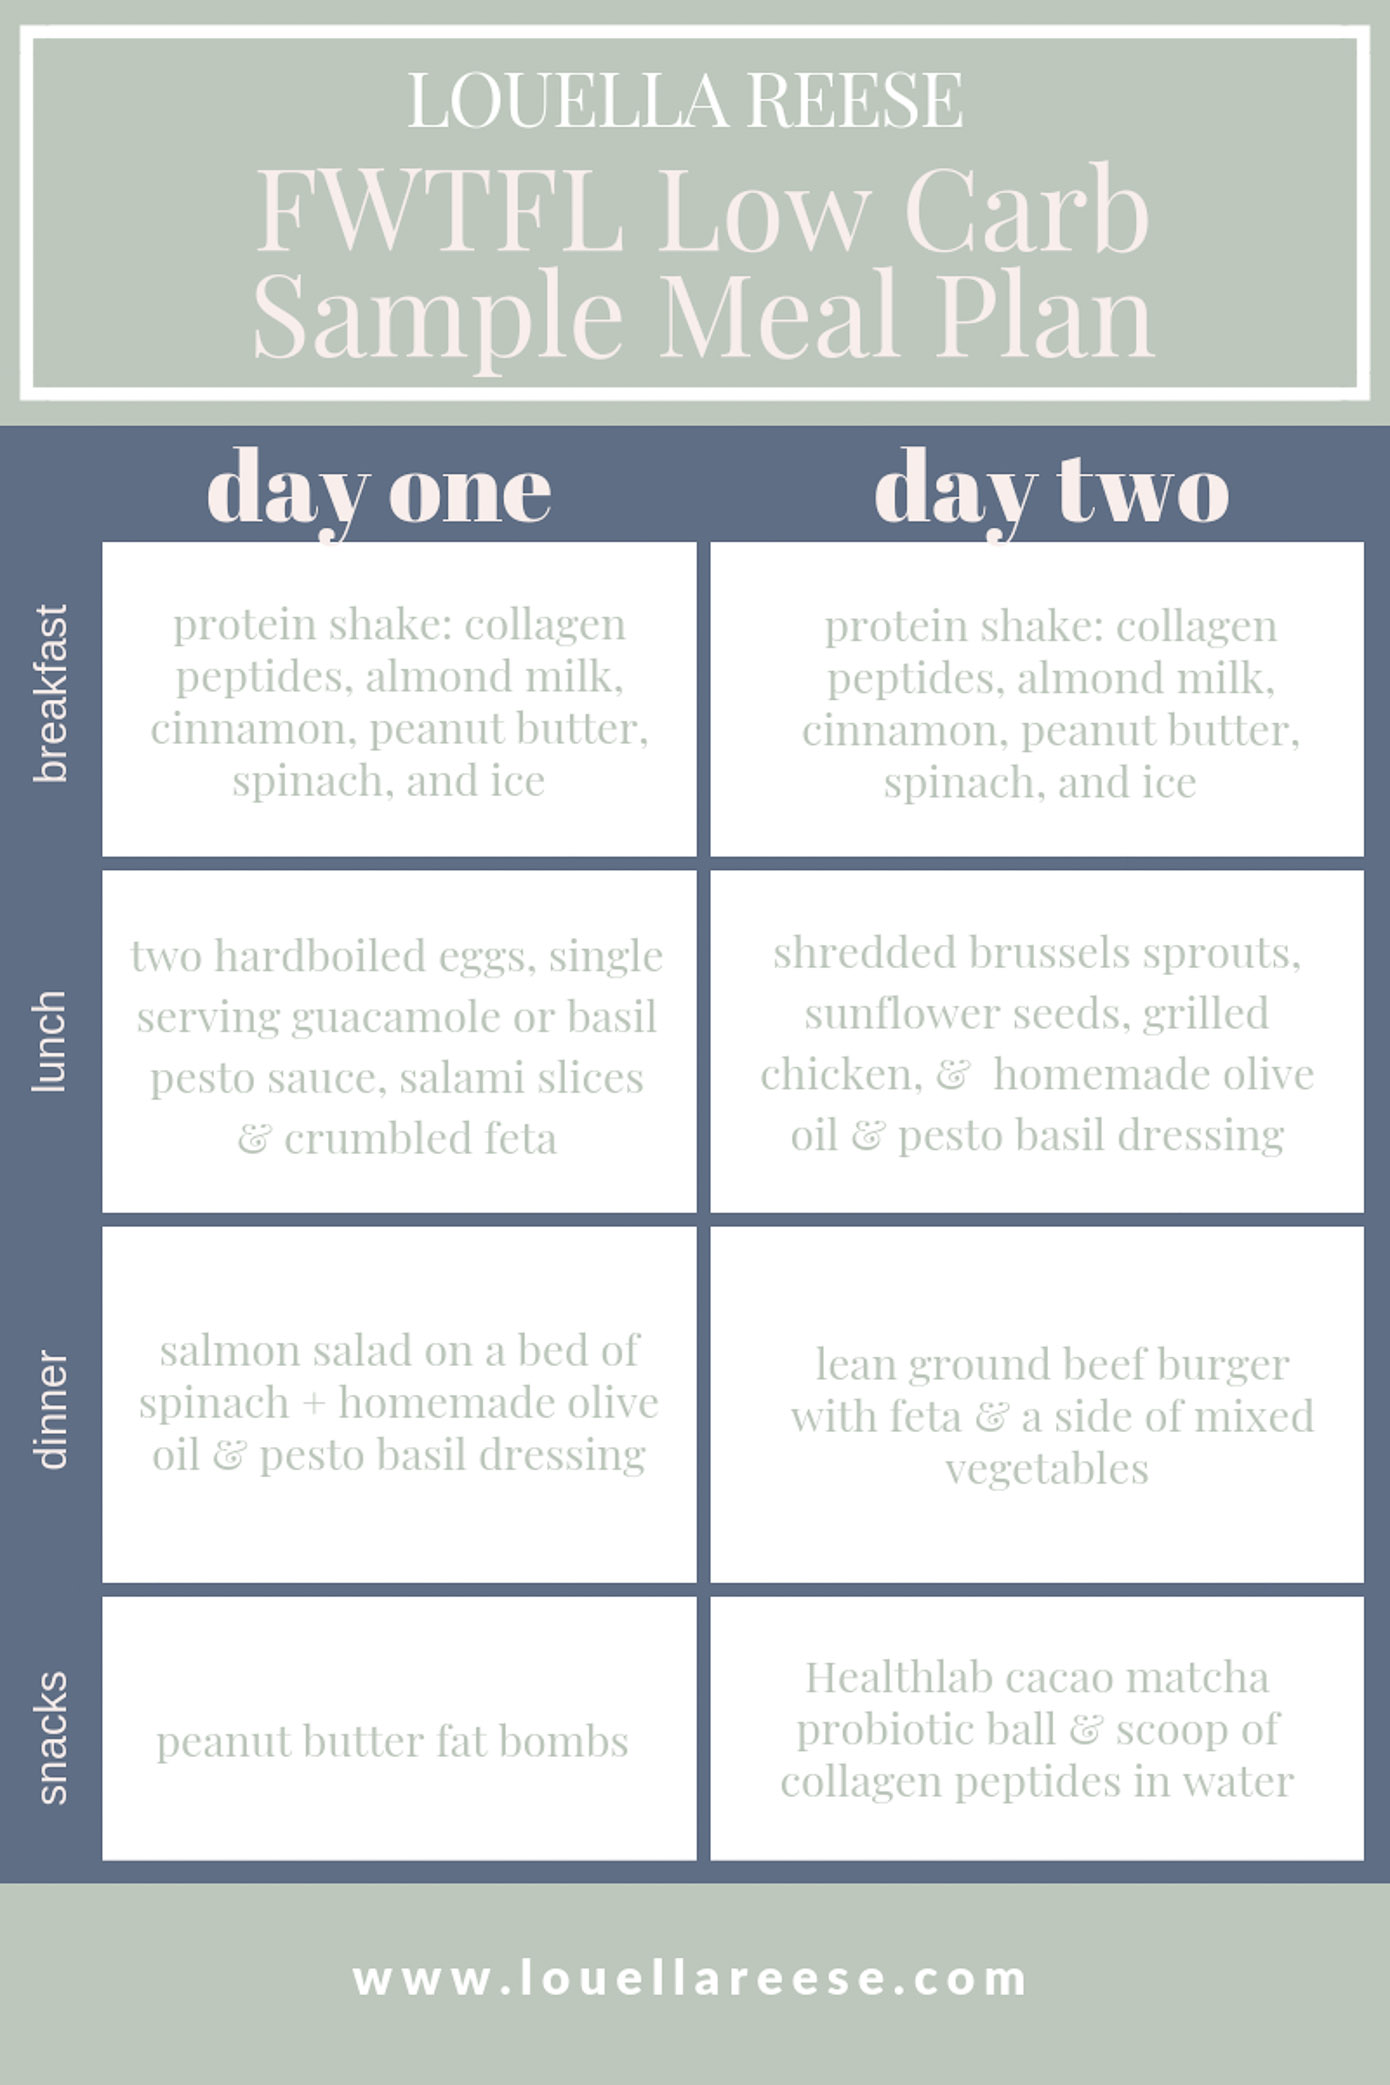 FWTFL Low Carb Meal Plan | Low Carb Day Meal Ideas featured on Louella Reese